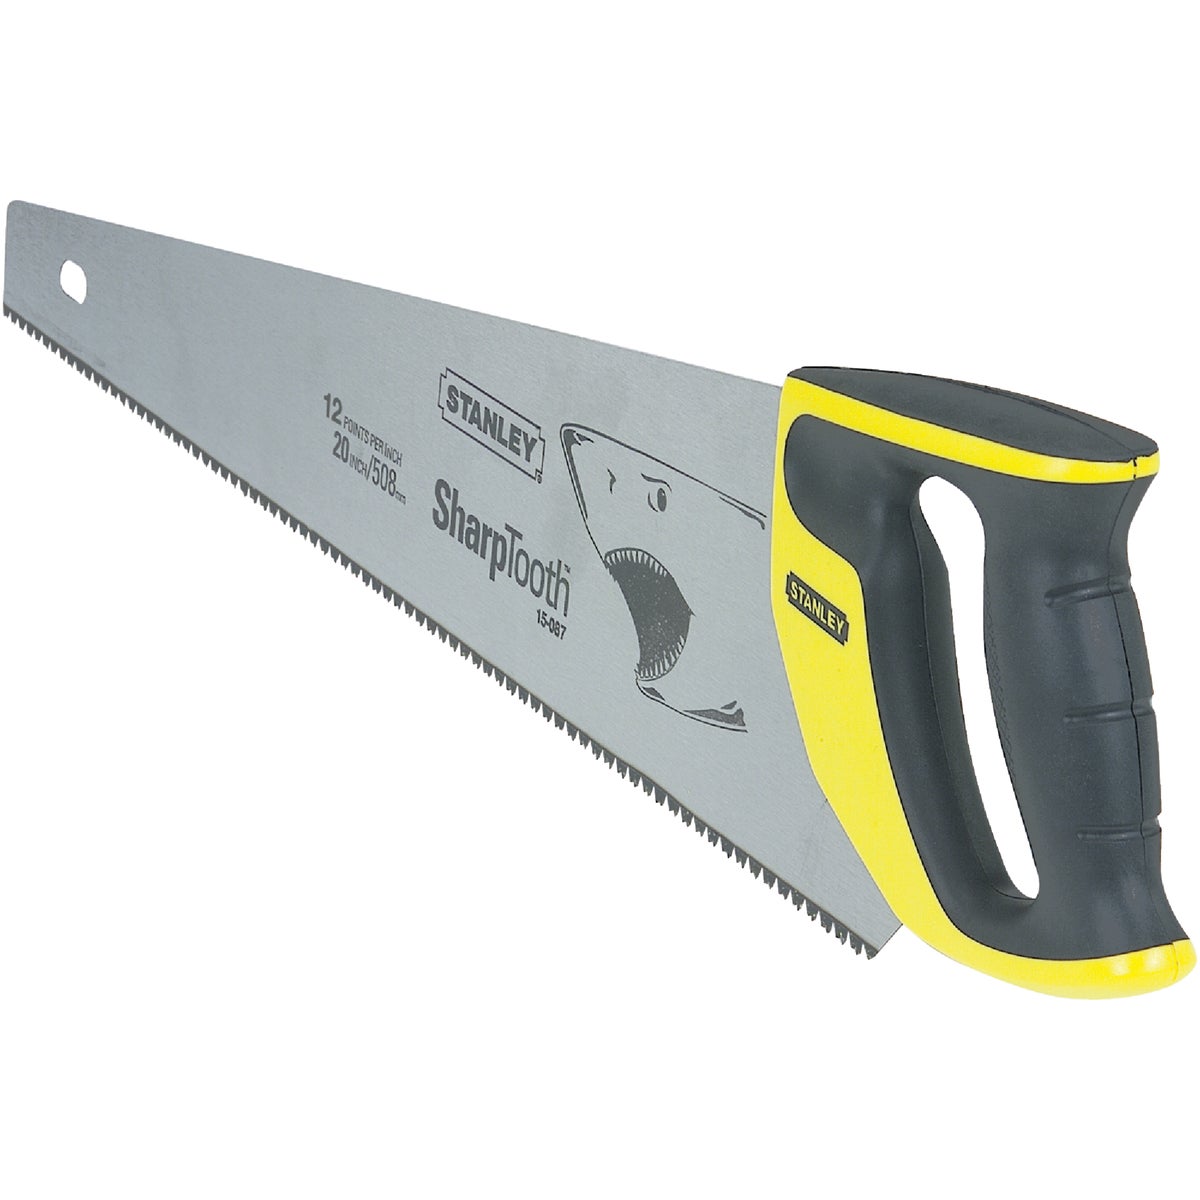 Stanley 20 In. L. Blade 12 PPI Comfort Grip Handle Hand Saw